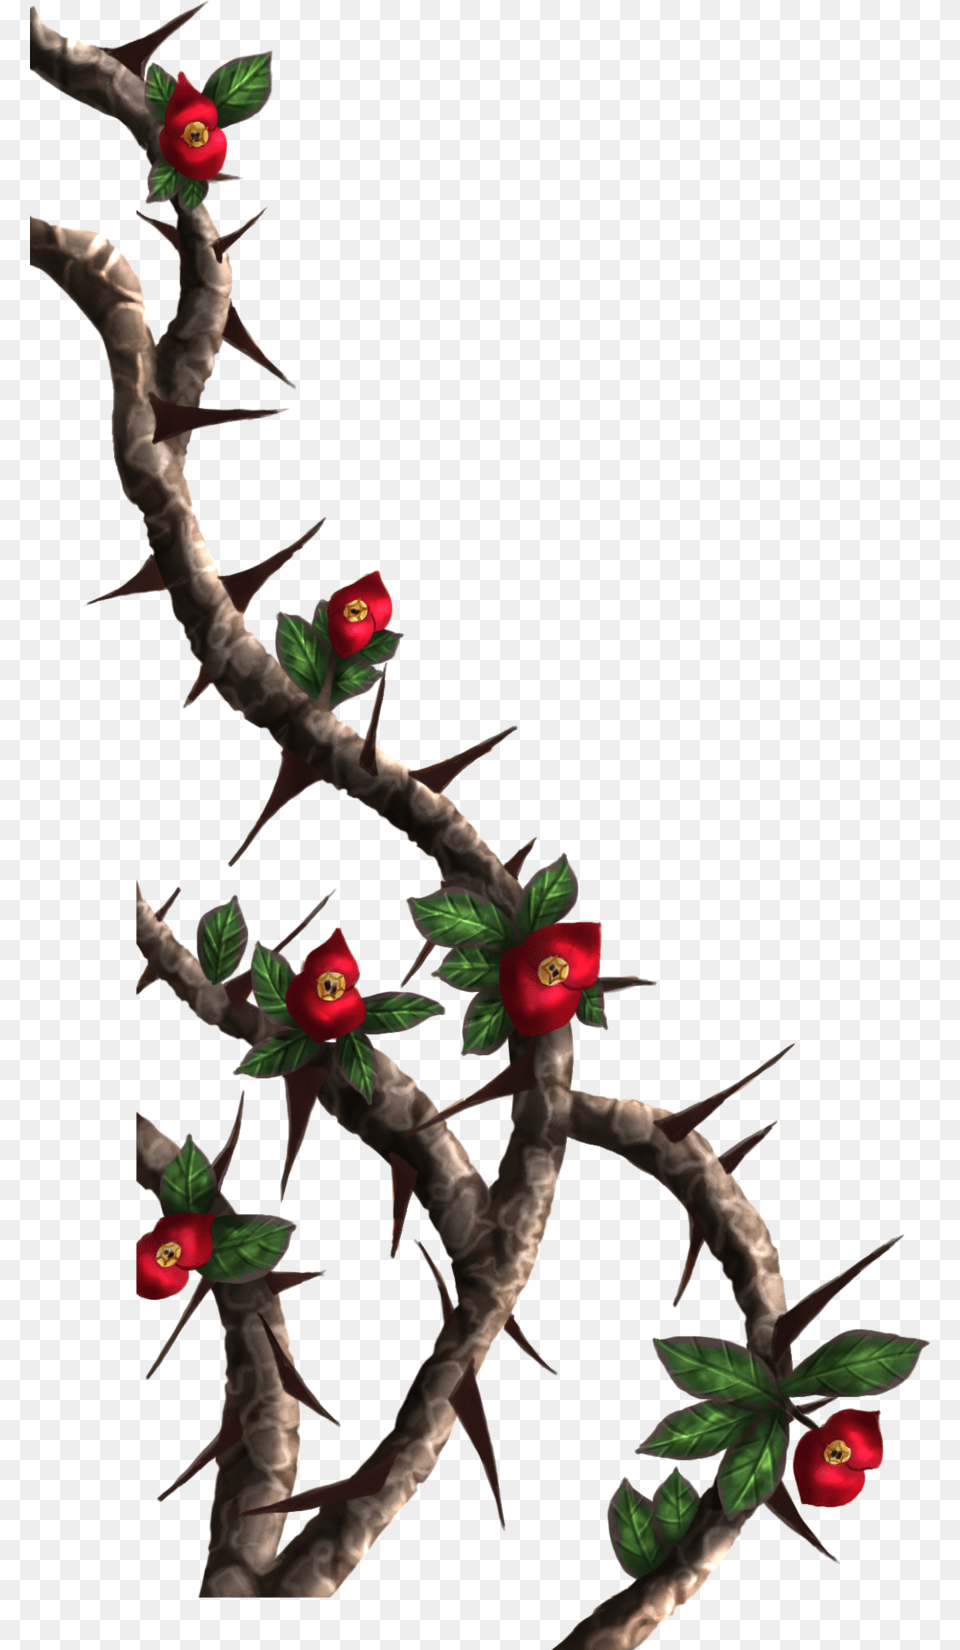 Drawings Of Roses With Vines And Thorns Crown Painted, Tree, Ikebana, Rose, Sprout Free Png